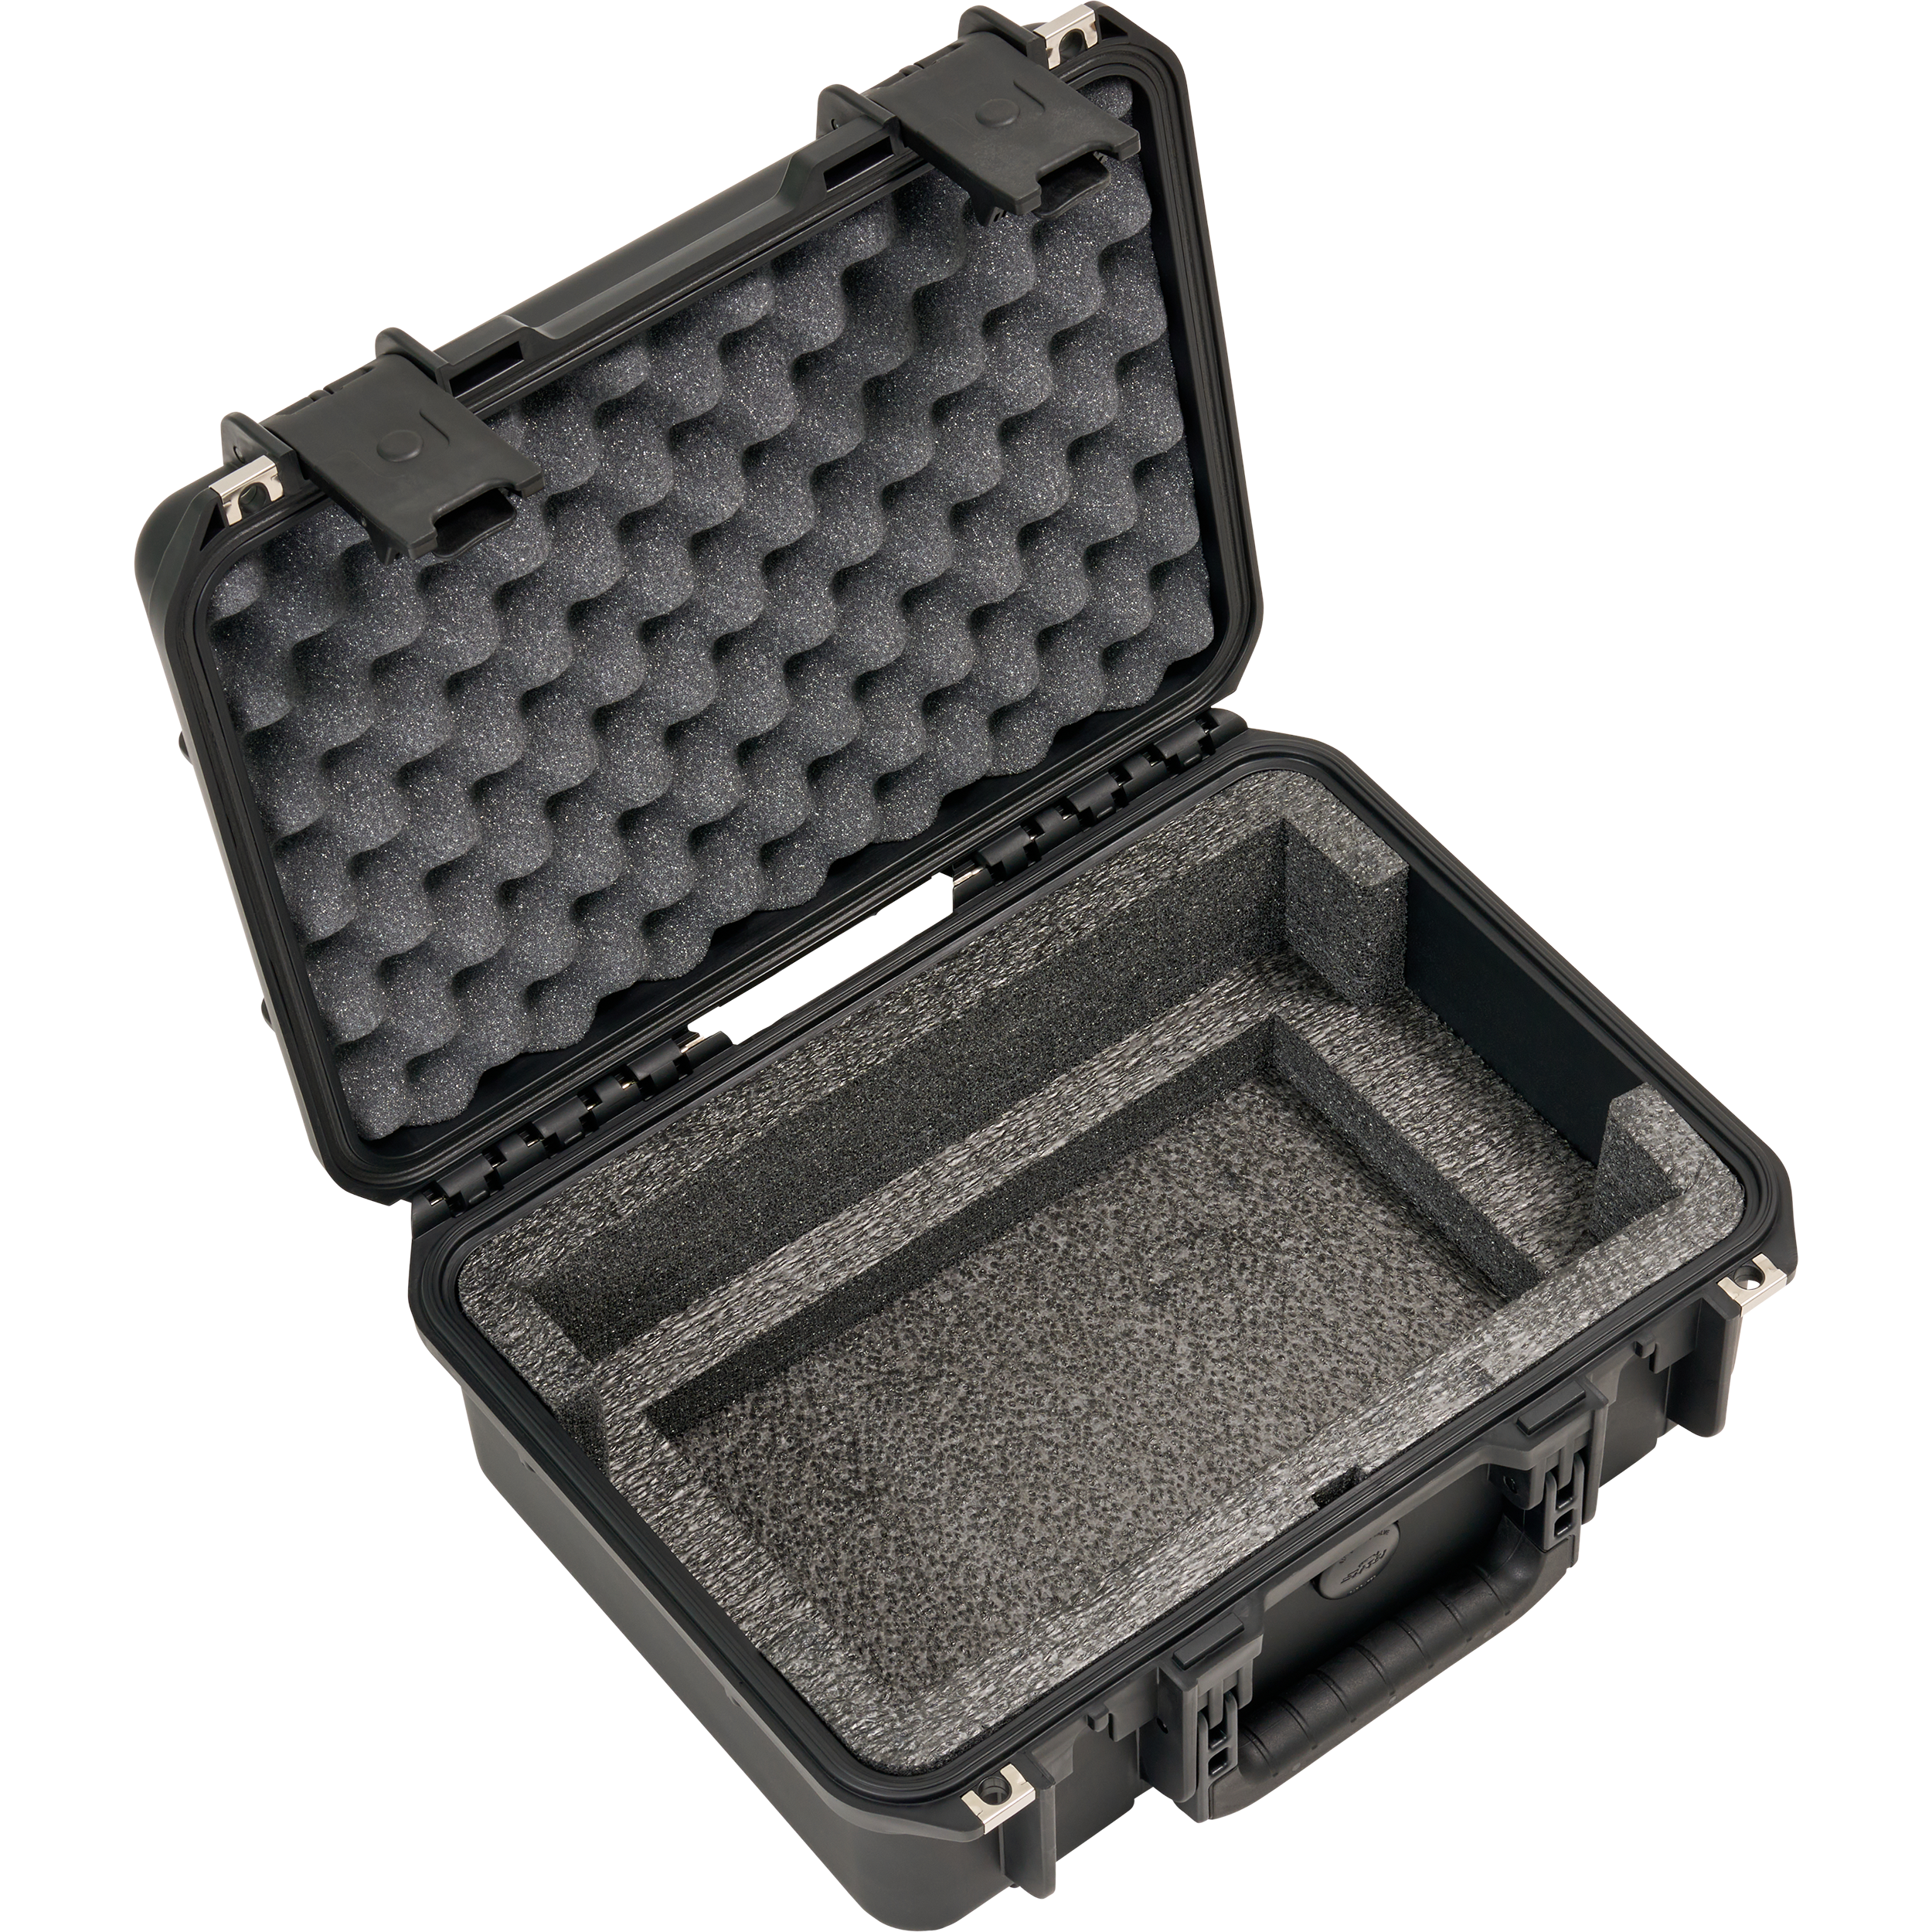 BYFP ipCase for Roland VR-4HD